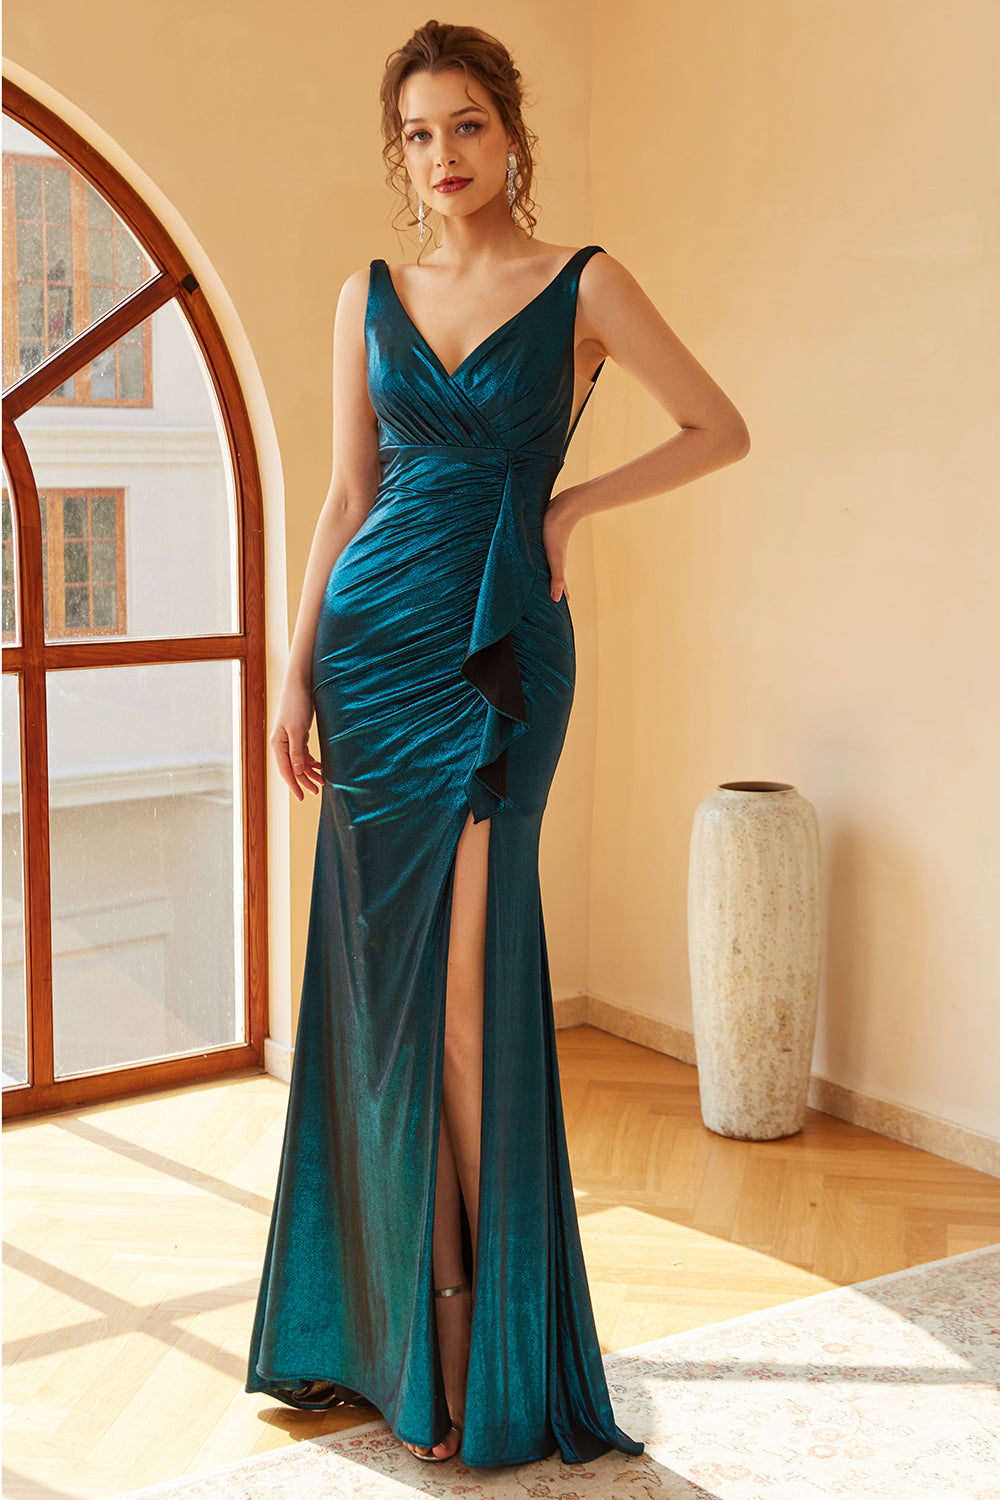 Peacock Blue Ruched Long Prom Dress